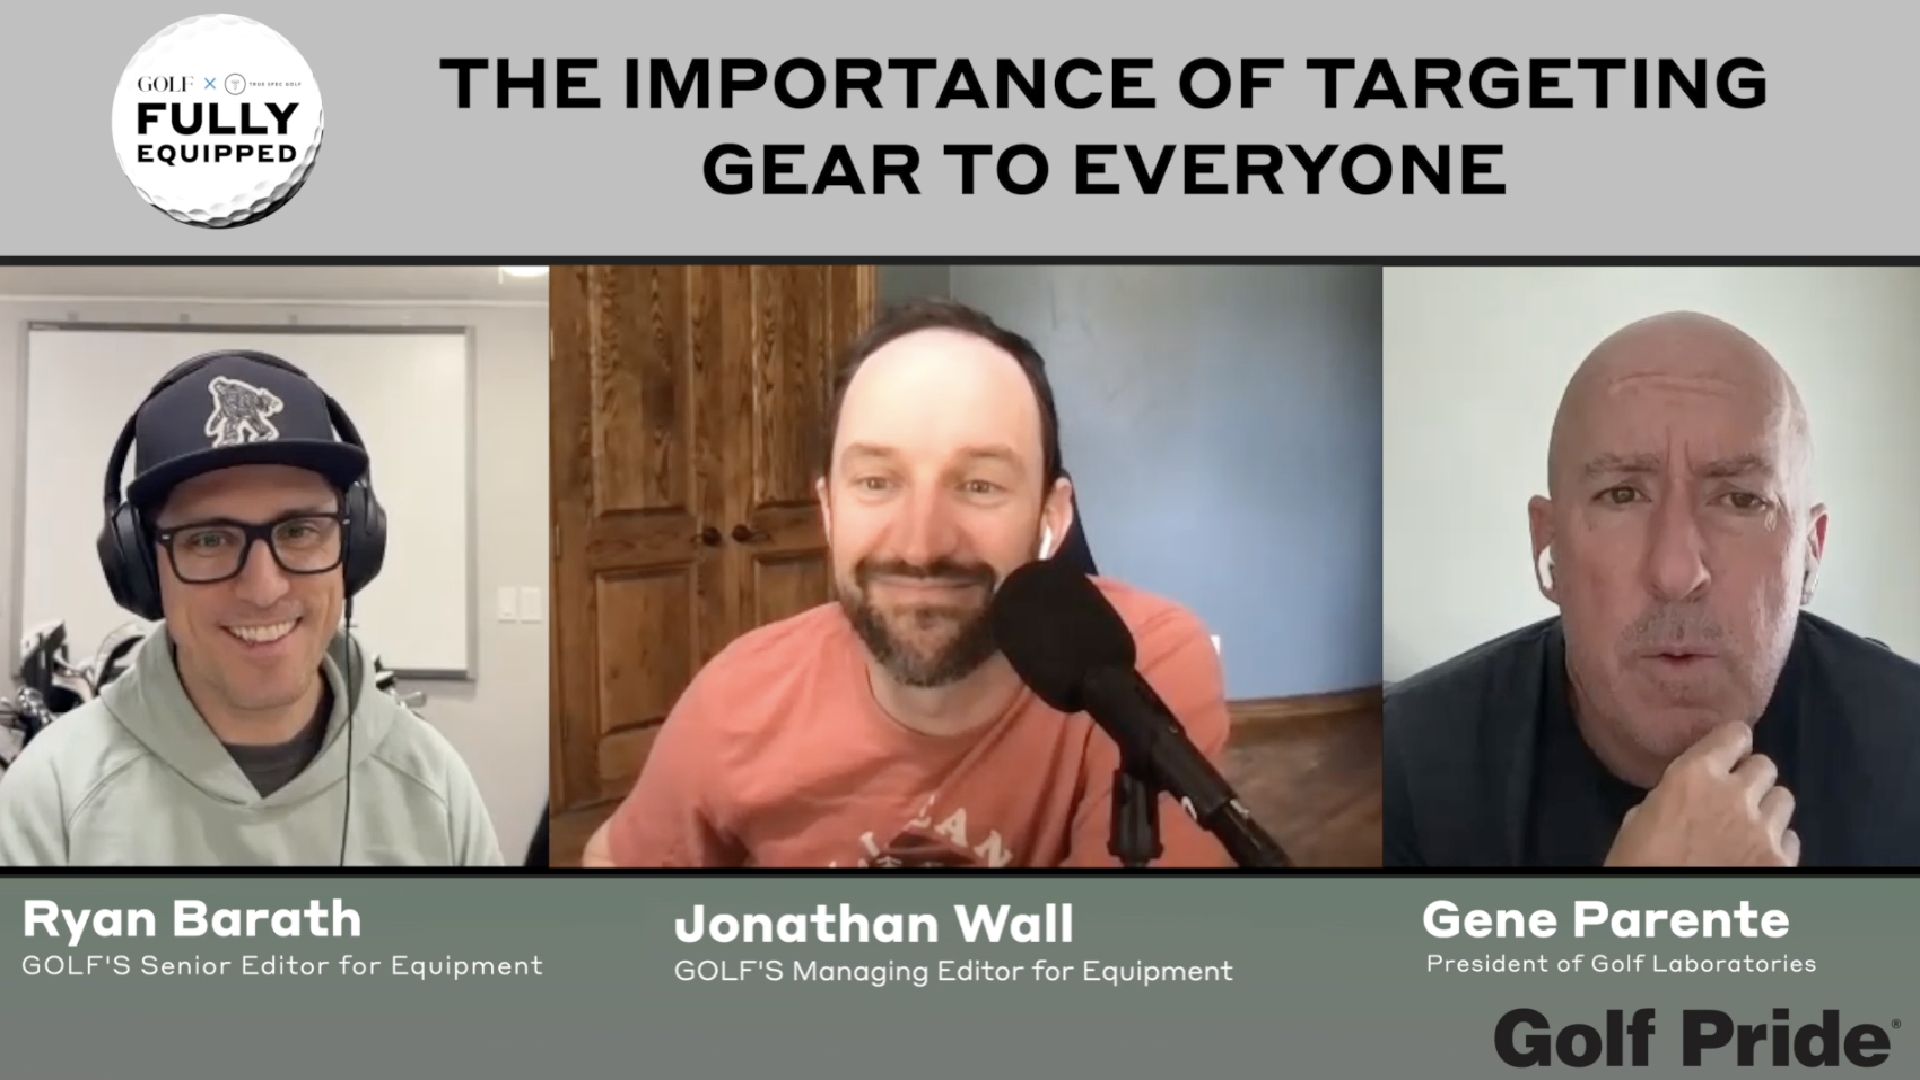 Fully Equipped: The importance of targeting gear to everyone